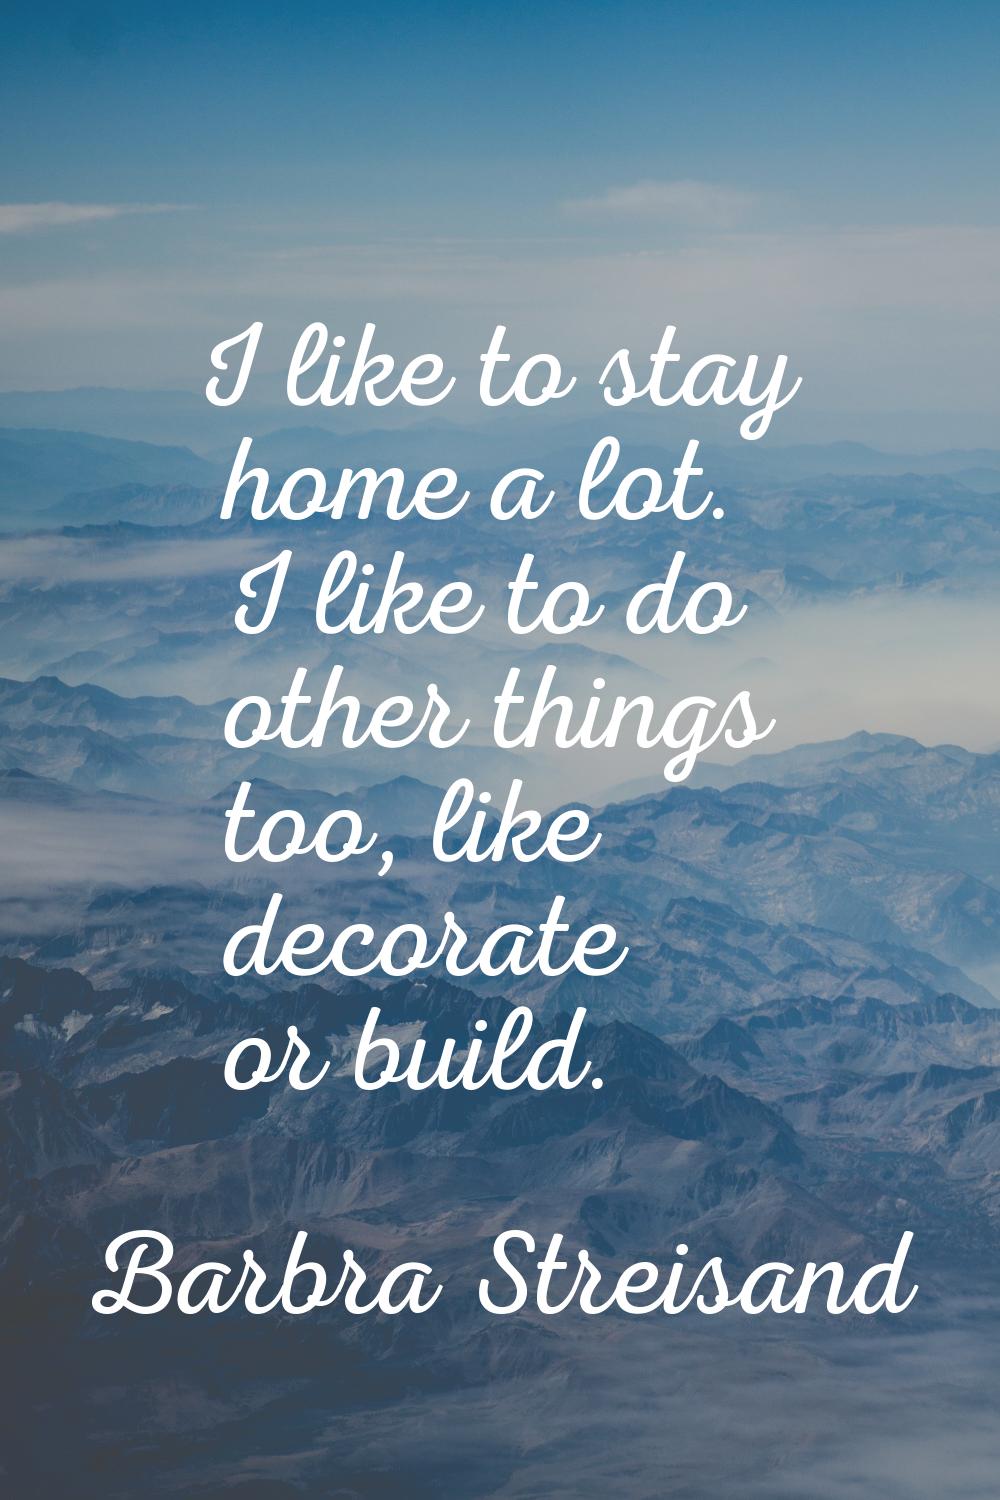 I like to stay home a lot. I like to do other things too, like decorate or build.